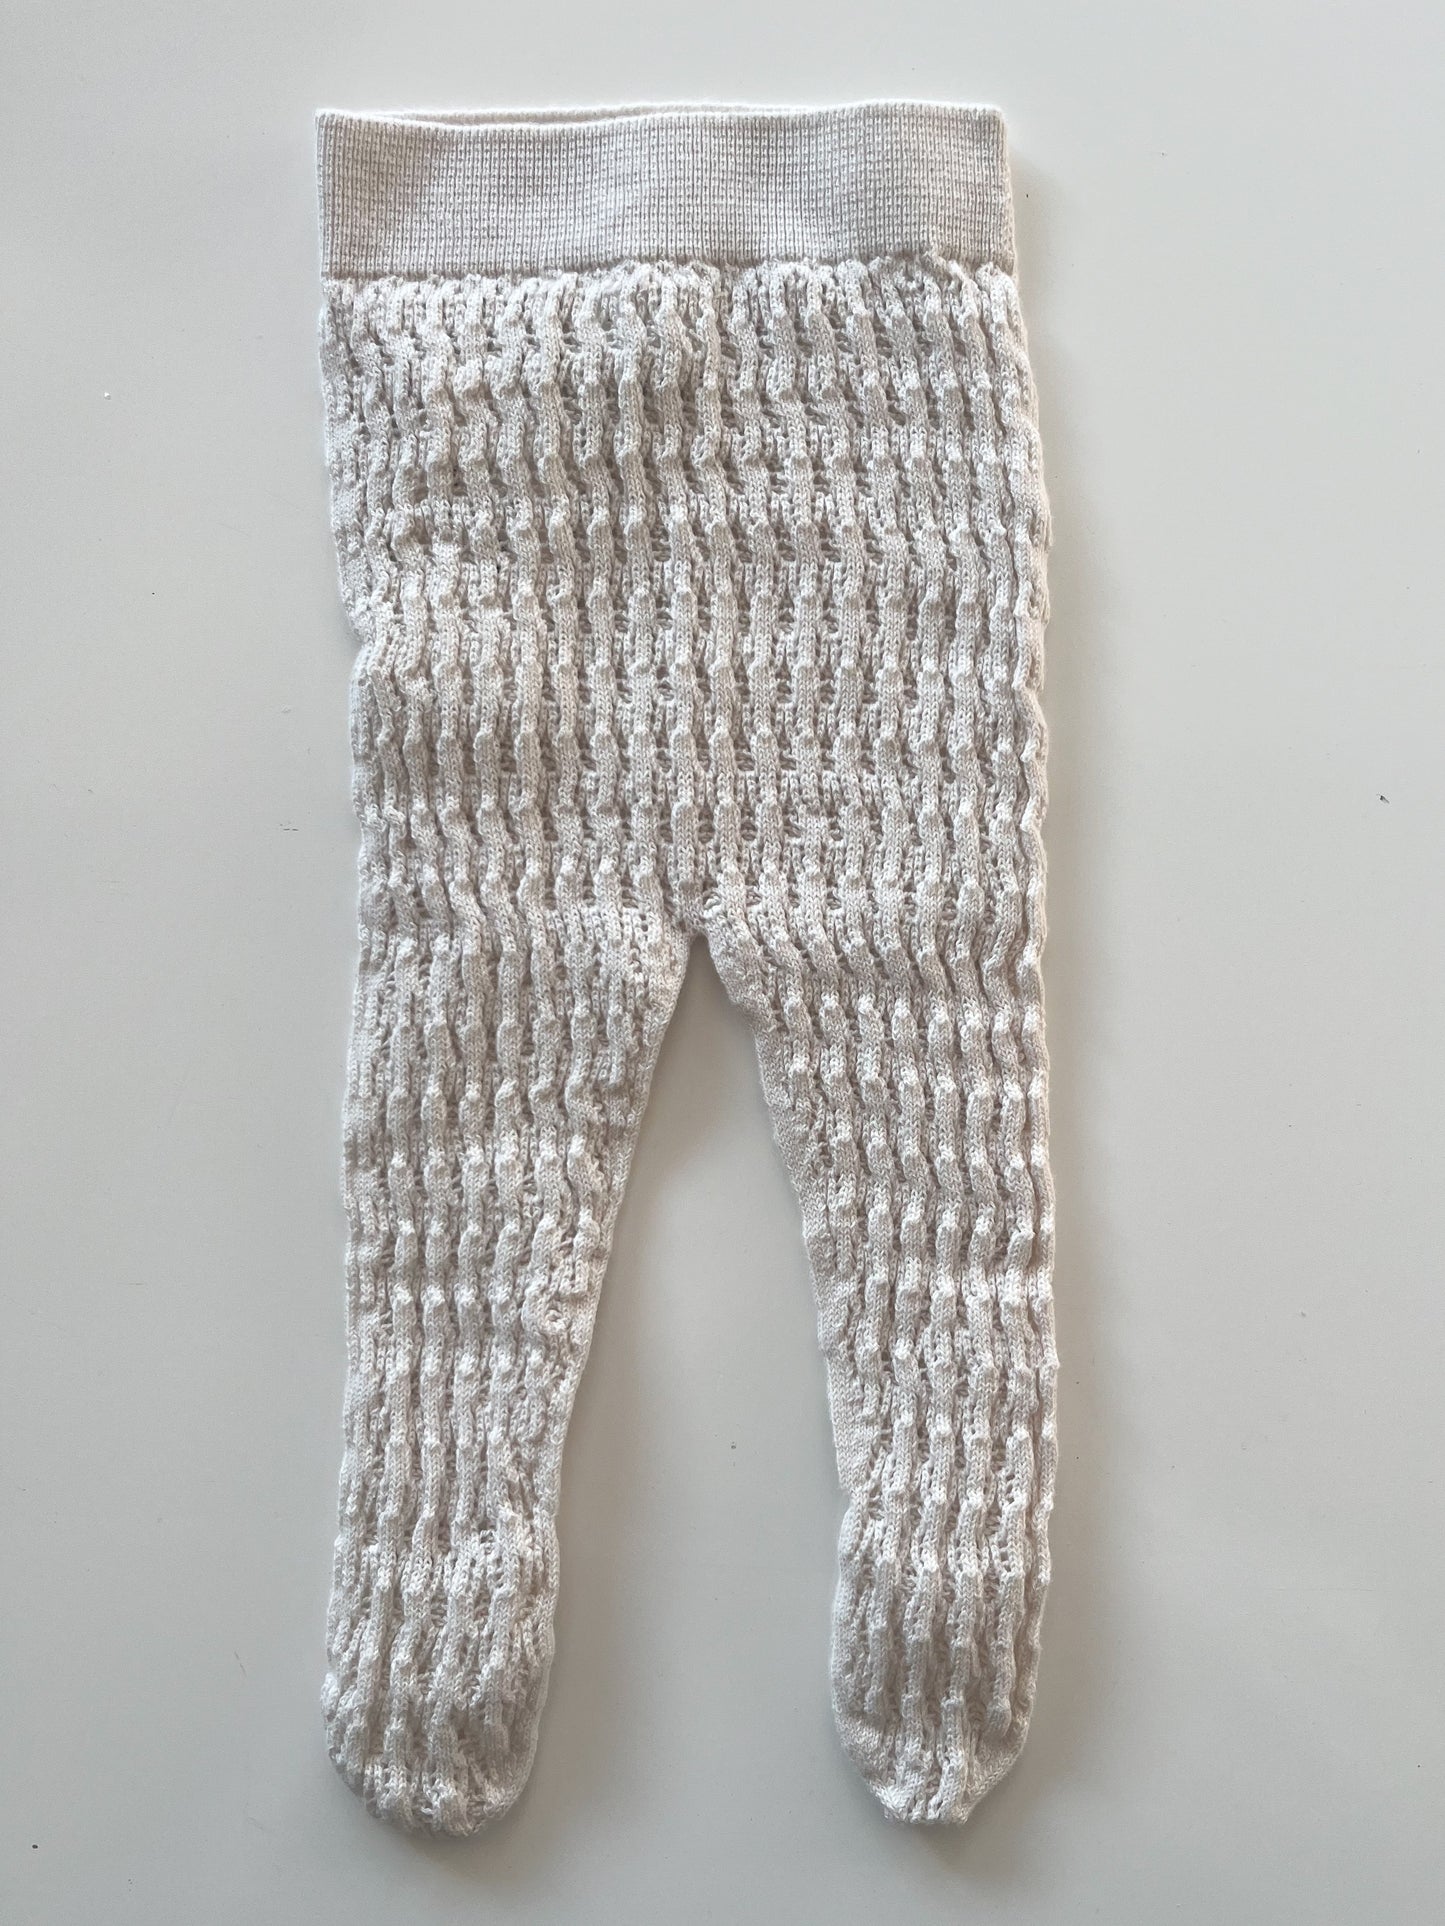 Knit Footie - Cream Perforated